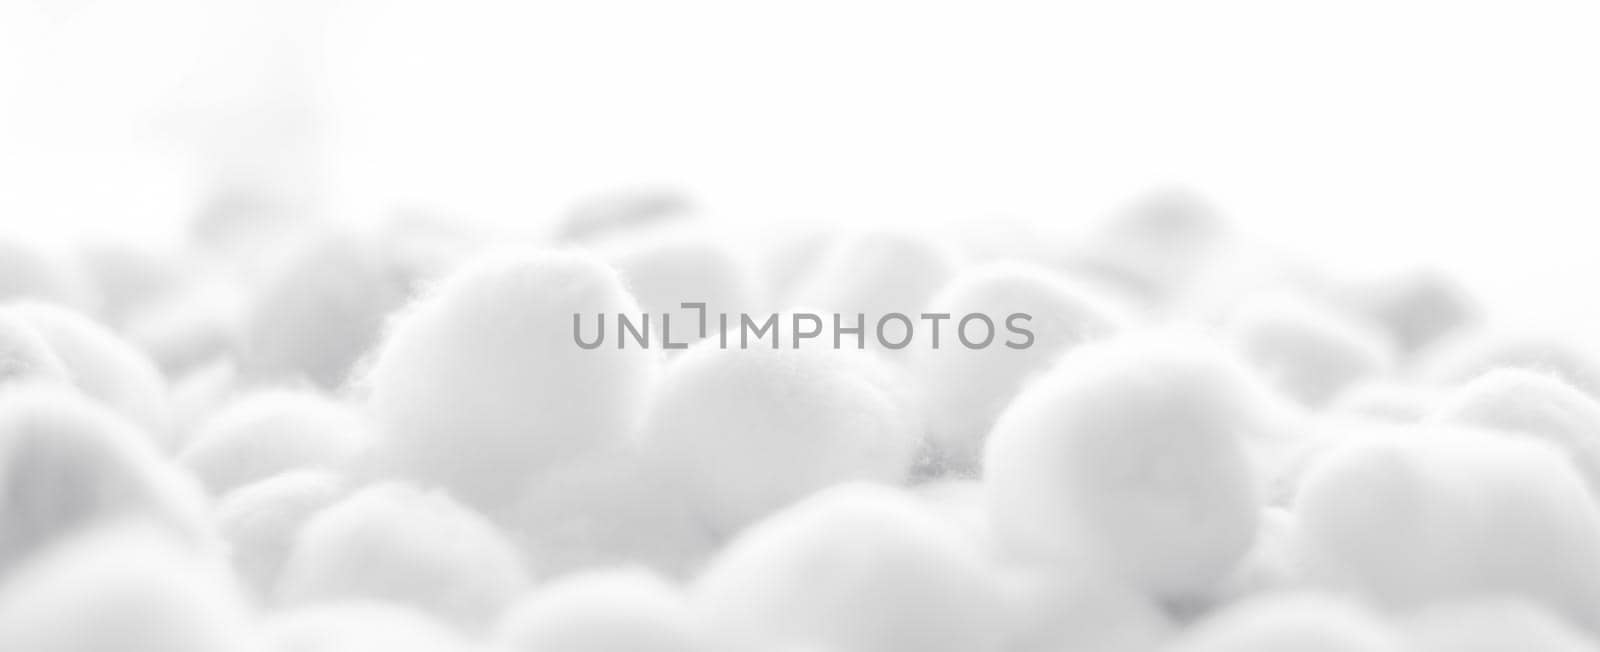 Organic cotton balls background for morning routine, spa cosmetics, hygiene and natural skincare beauty brand product as healthcare and medical design by Anneleven